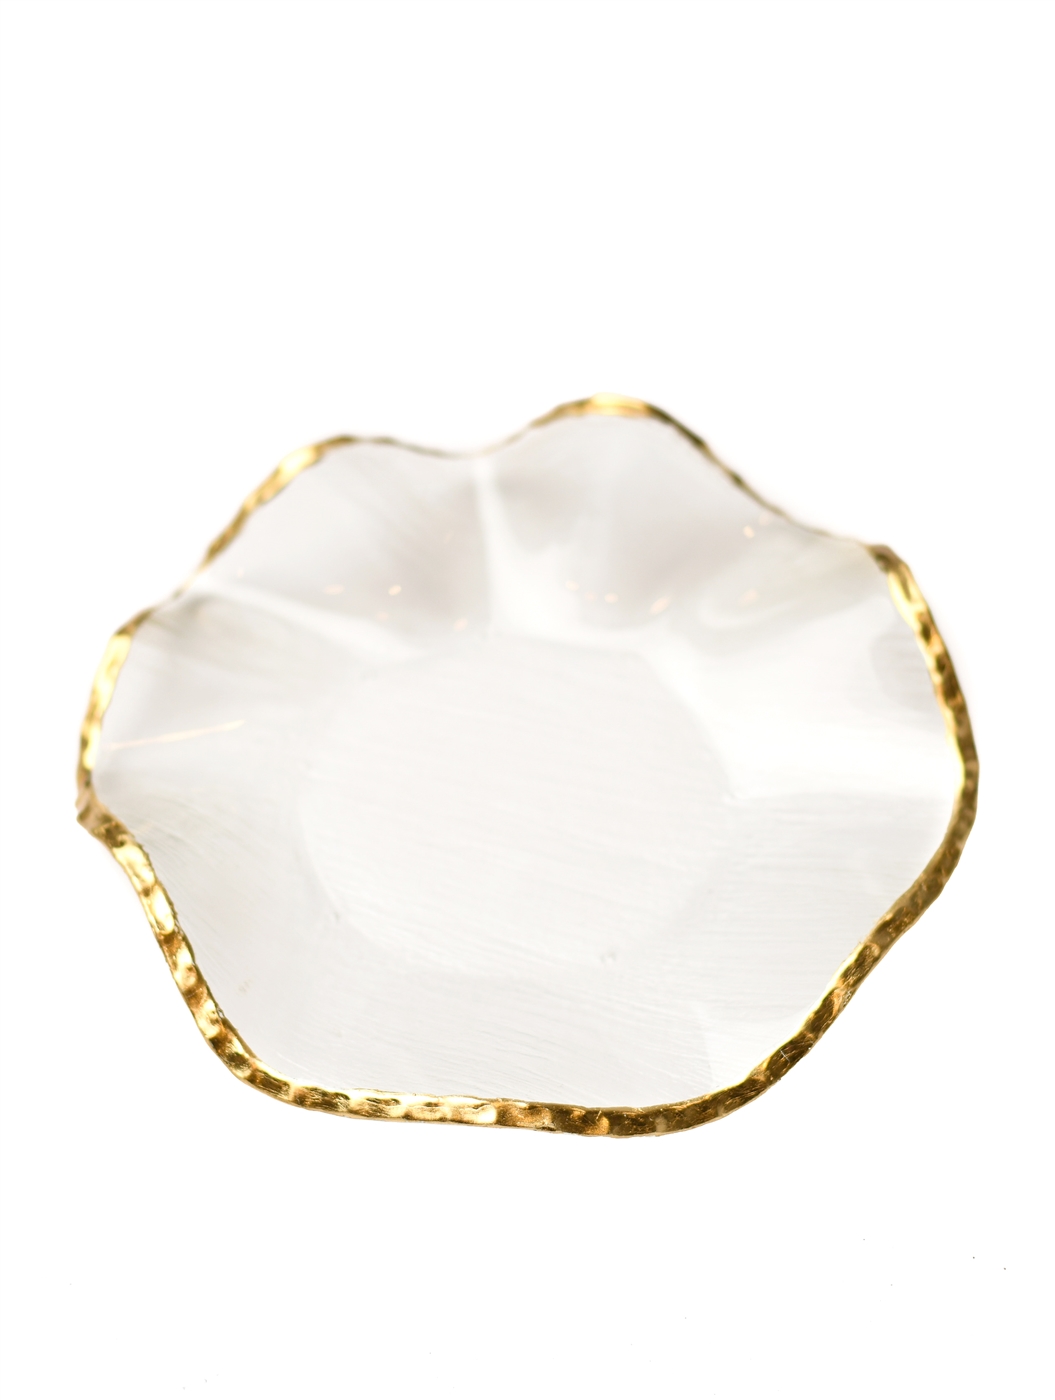 Clear Glass Tray with Gold Rim